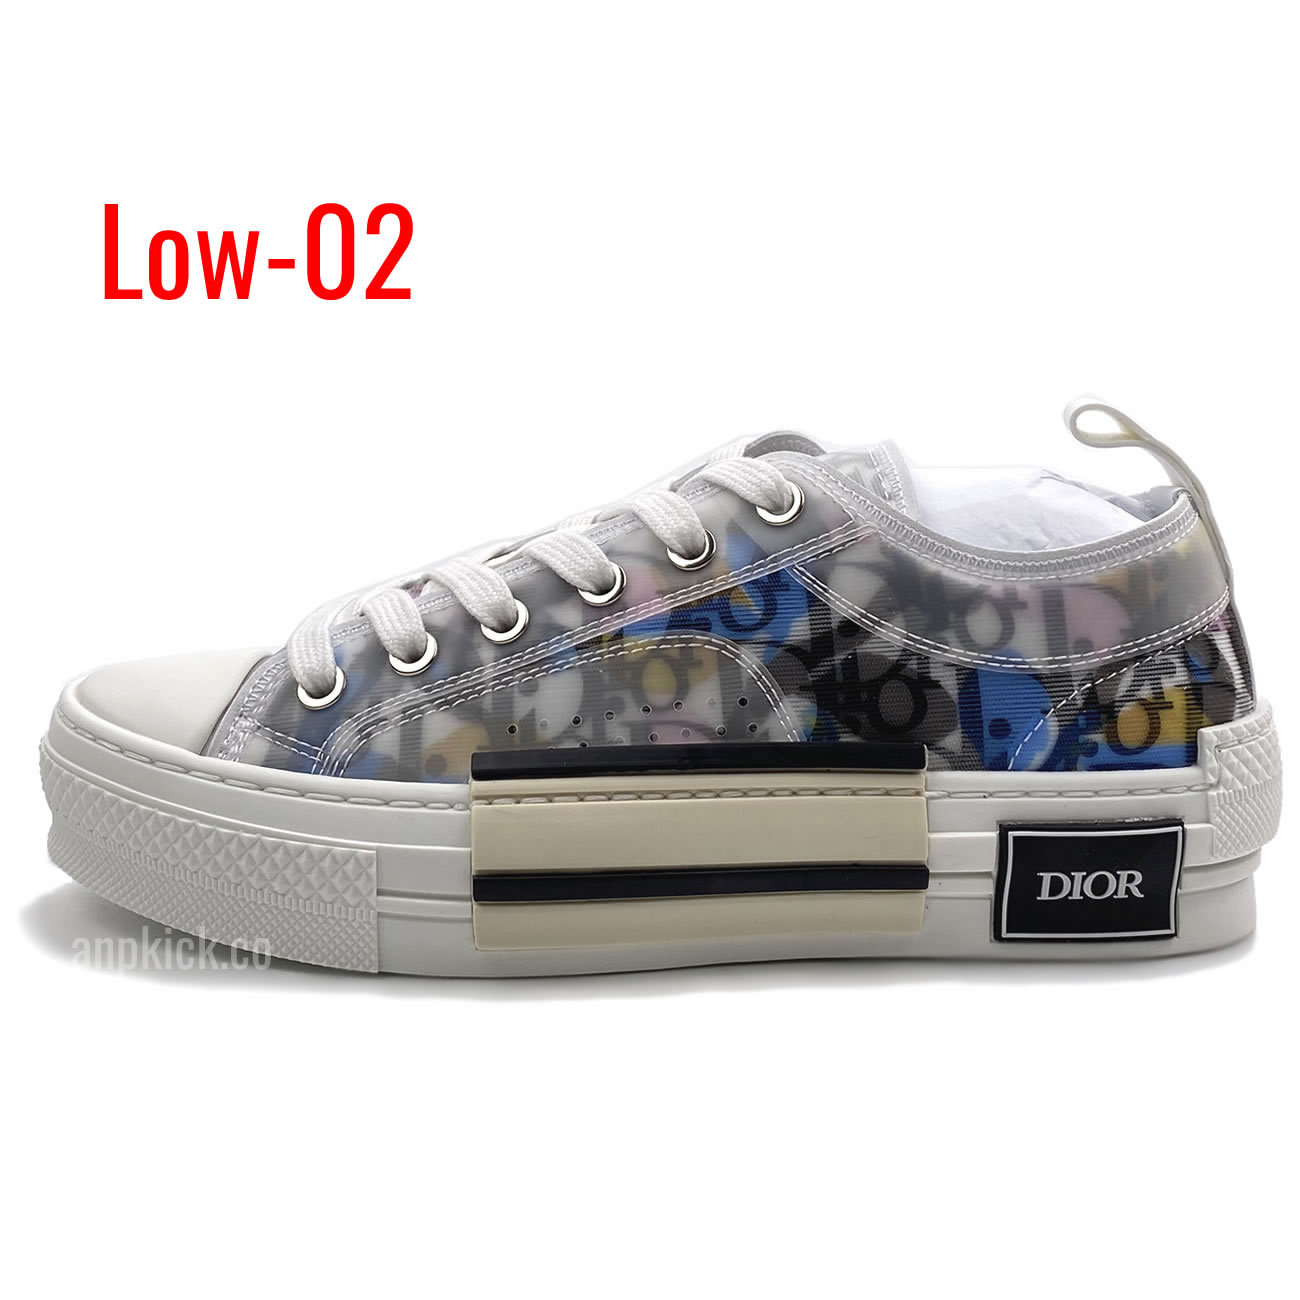 Dior B23 Low Shoes (2) - newkick.org